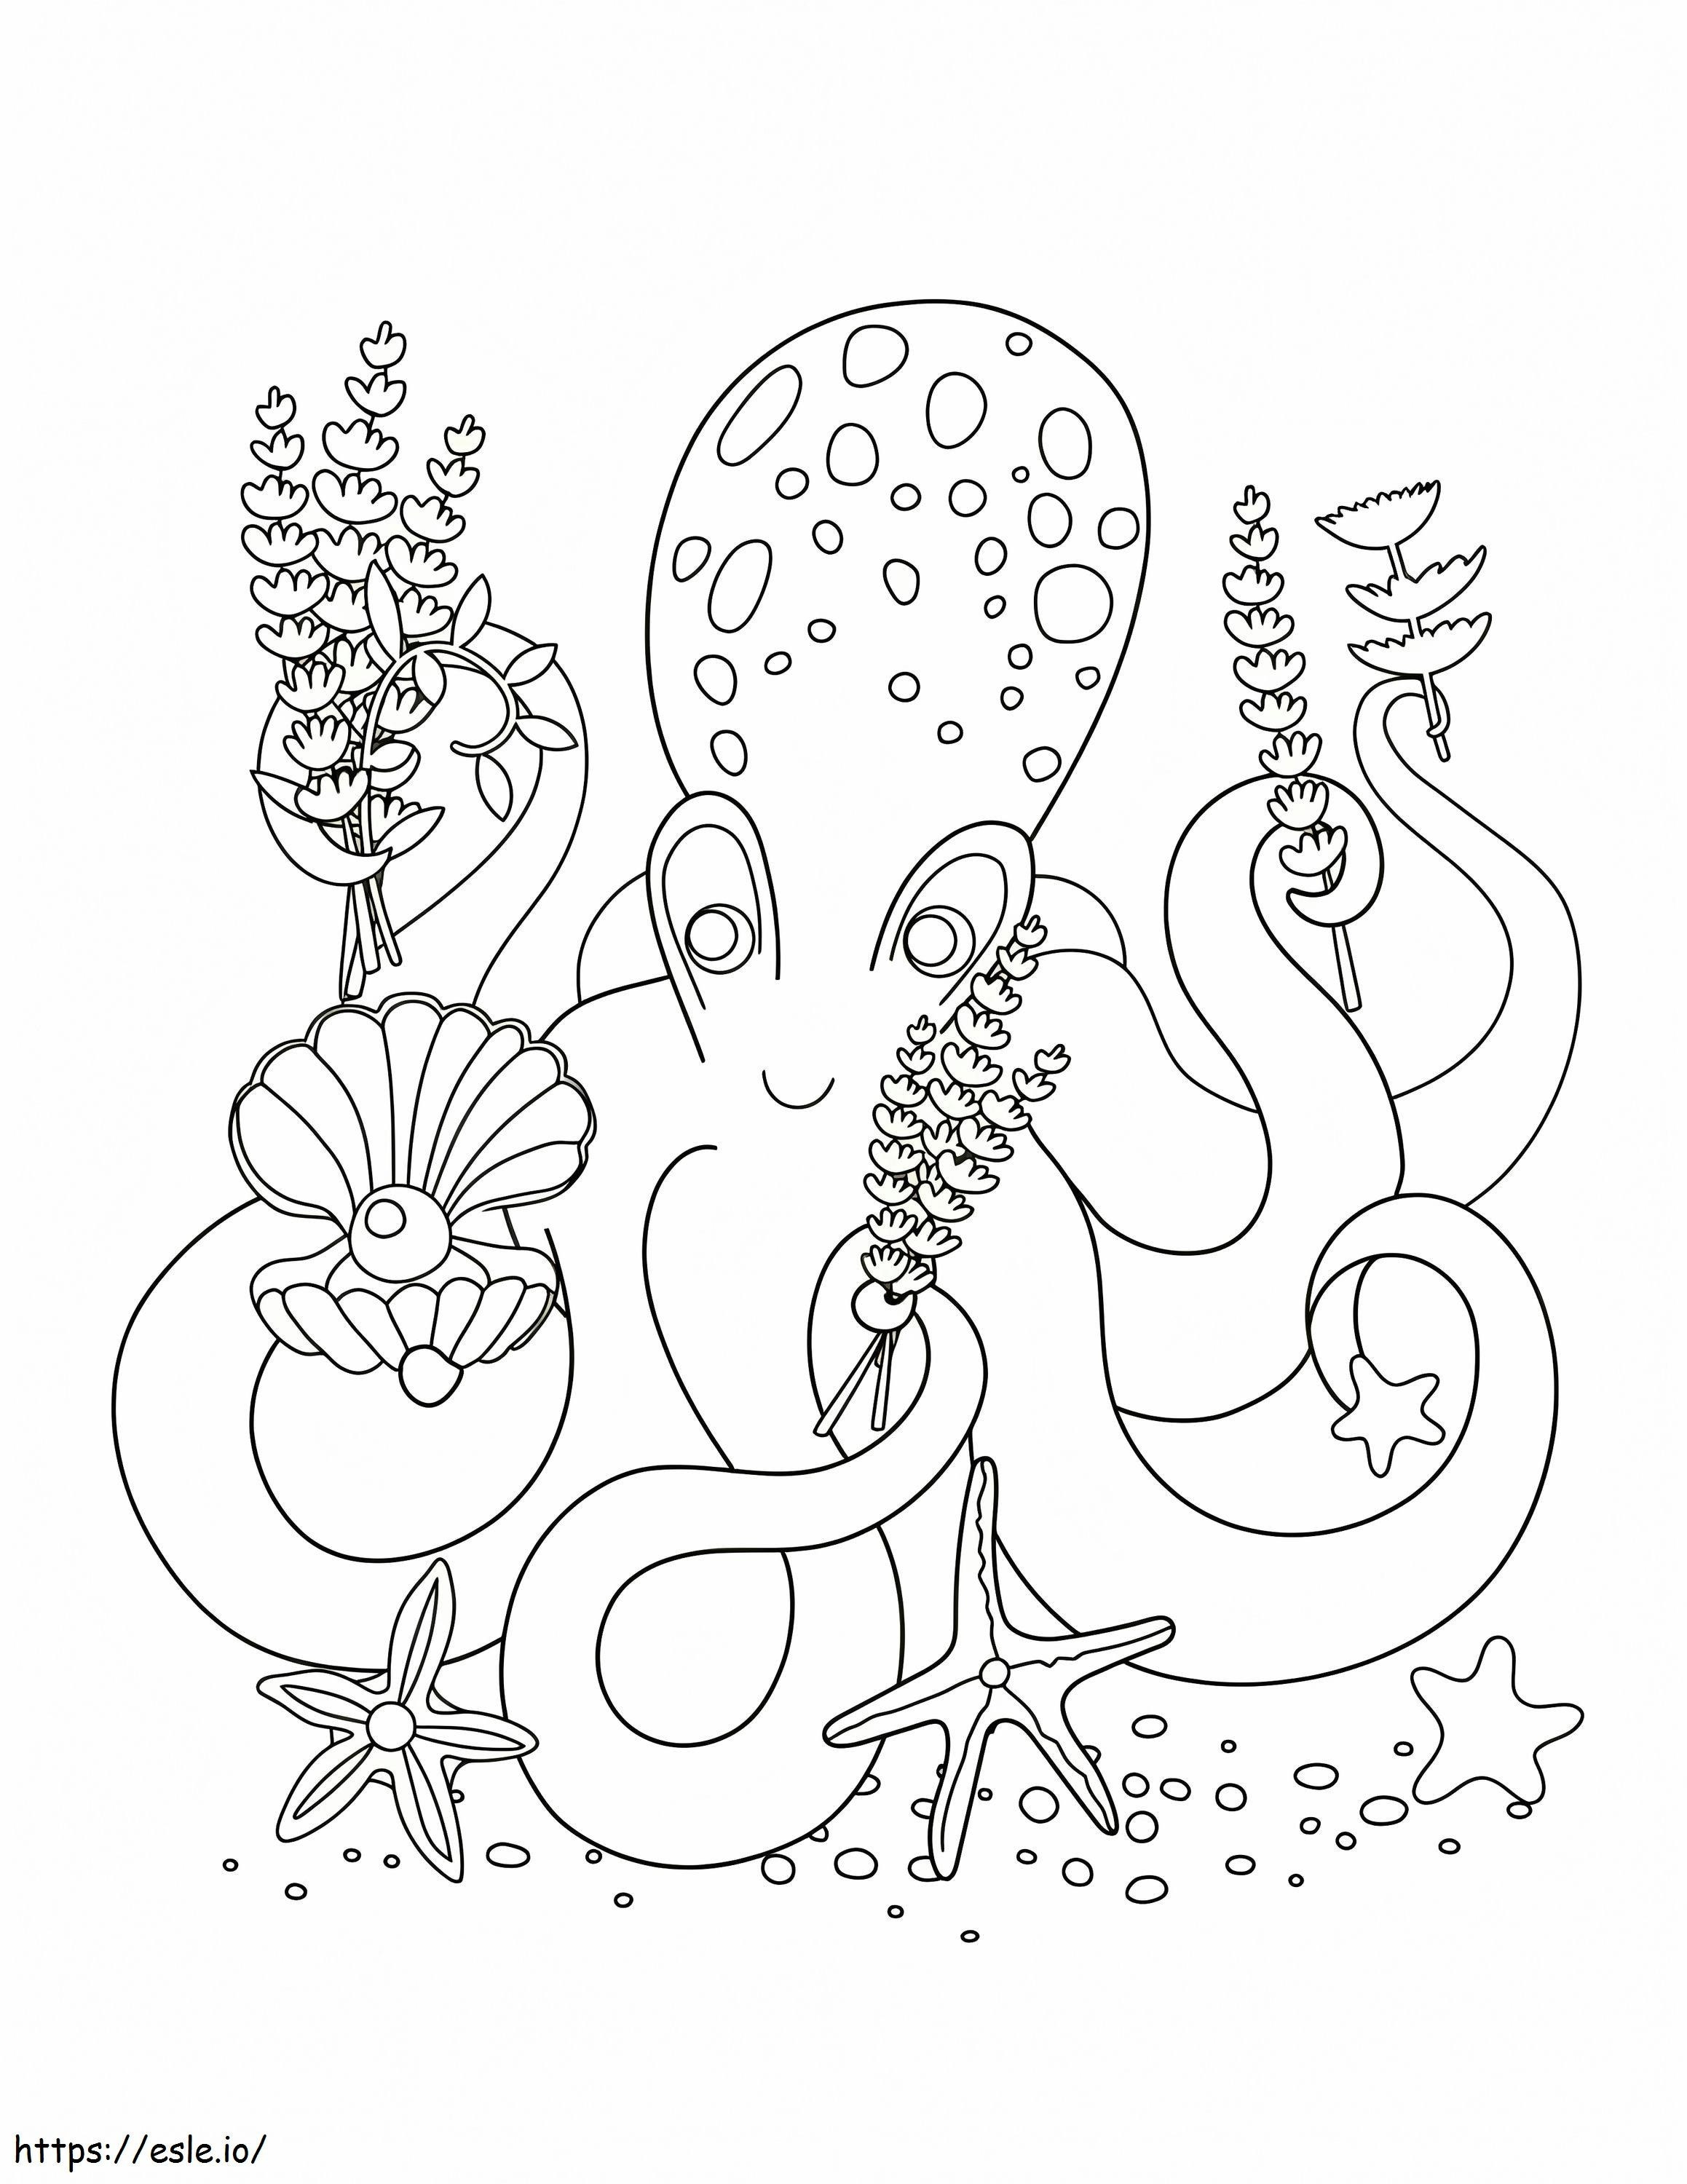 Adorable Octopus coloring page